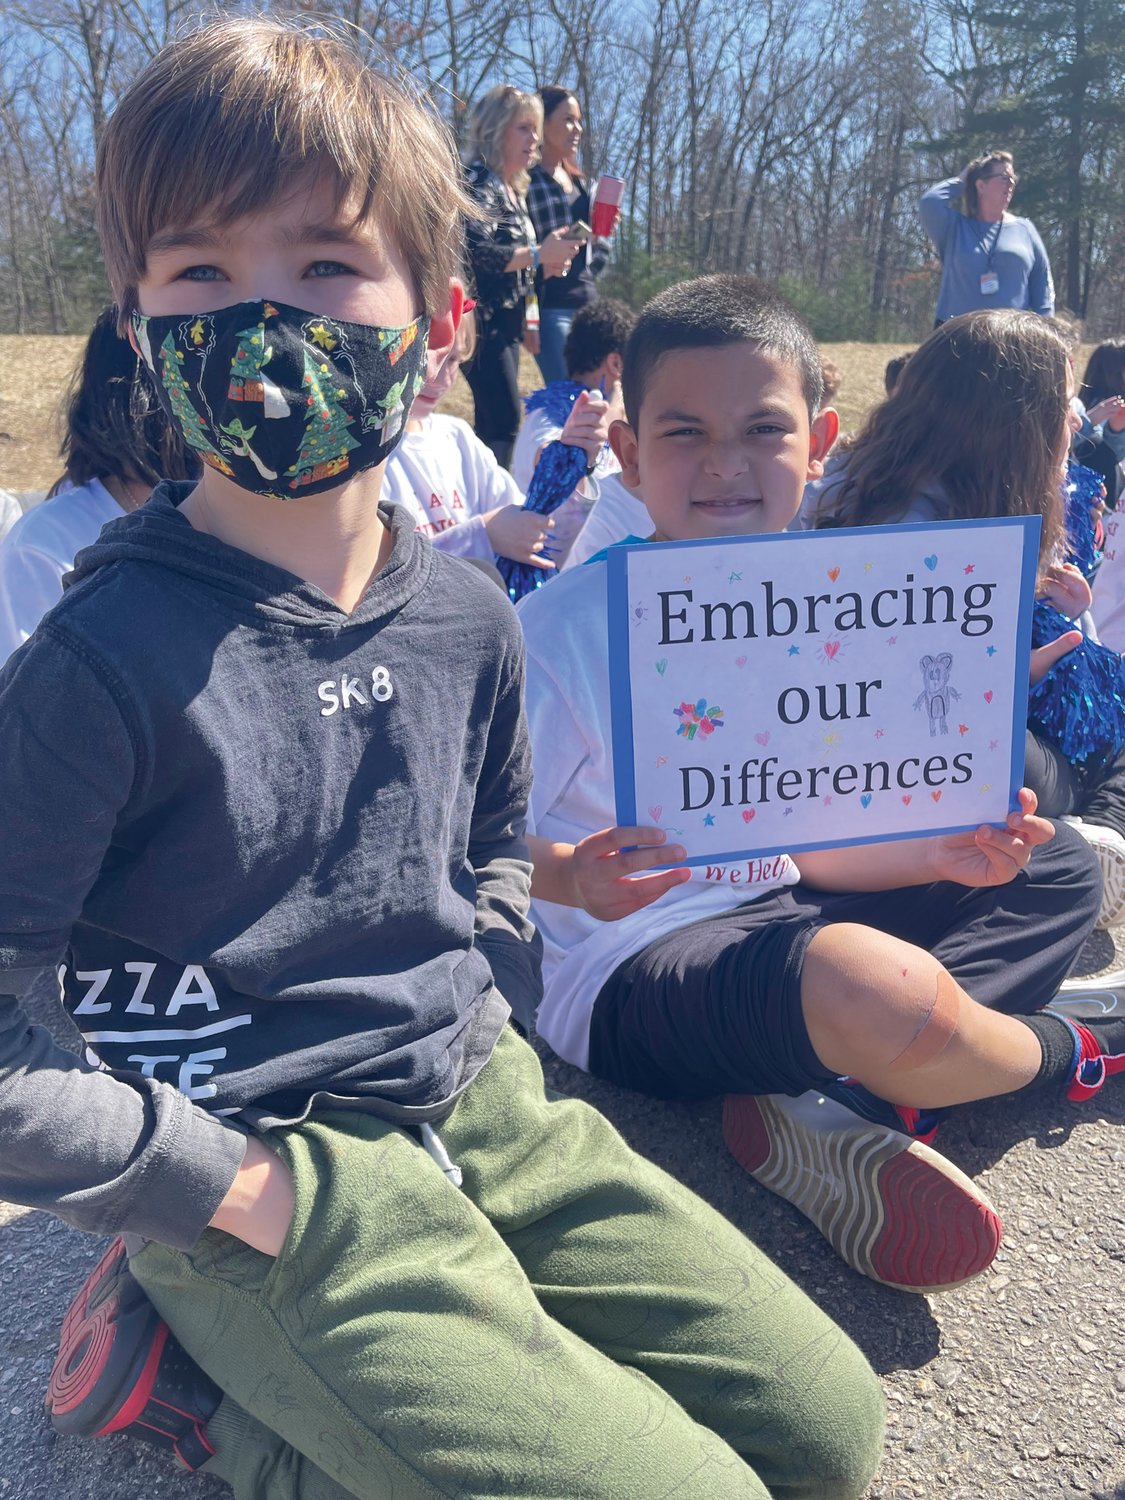 SIGNS OF INCLUSION: Fourth-graders Ryder Dieringer and Ayden Rios holding a sign declaring the Brown Avenue Family believes in “Embracing our Differences.”